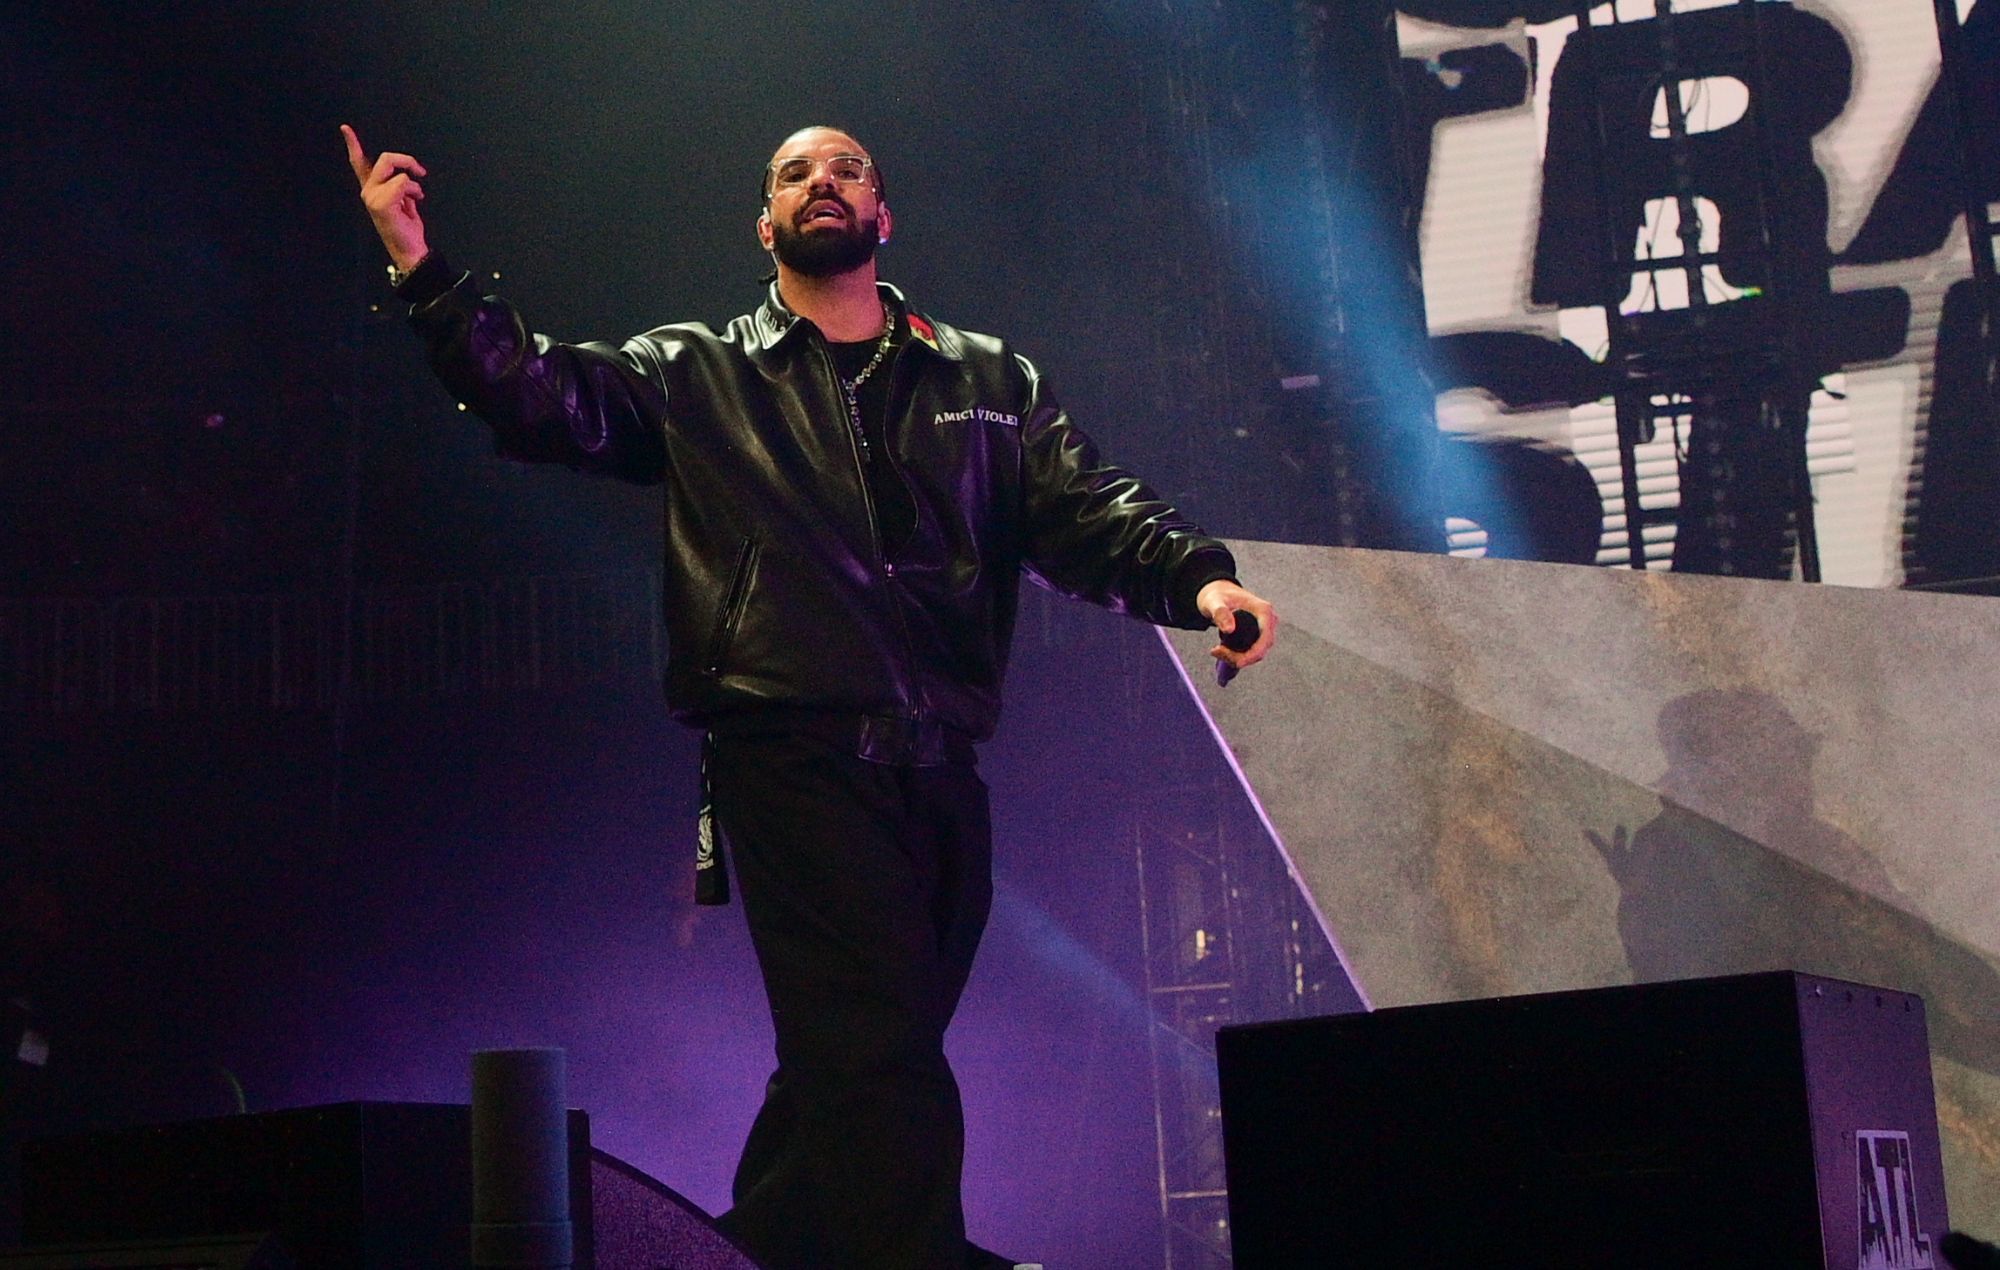 Drake shares video of his flooded mansion as torrential rain hits Toronto